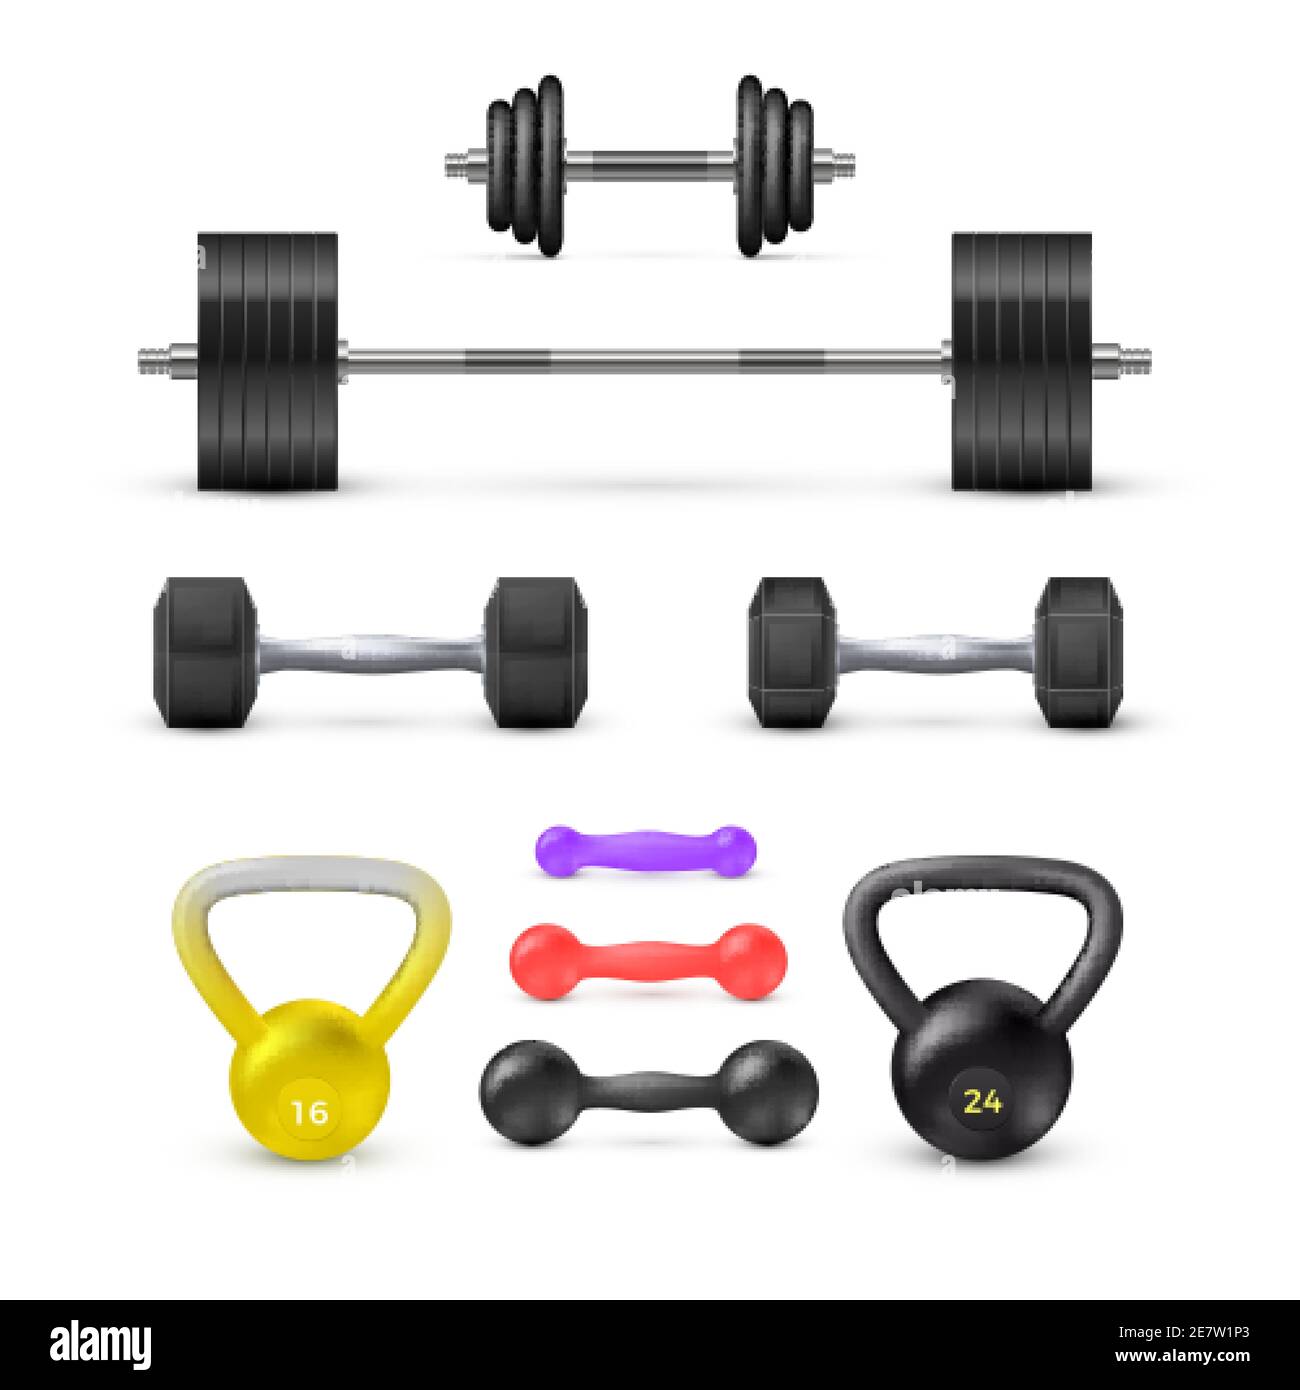 https://c8.alamy.com/comp/2E7W1P3/set-of-dumbbells-barbells-and-weight-fitness-and-bodybuilding-equipment-vector-elementrs-2E7W1P3.jpg